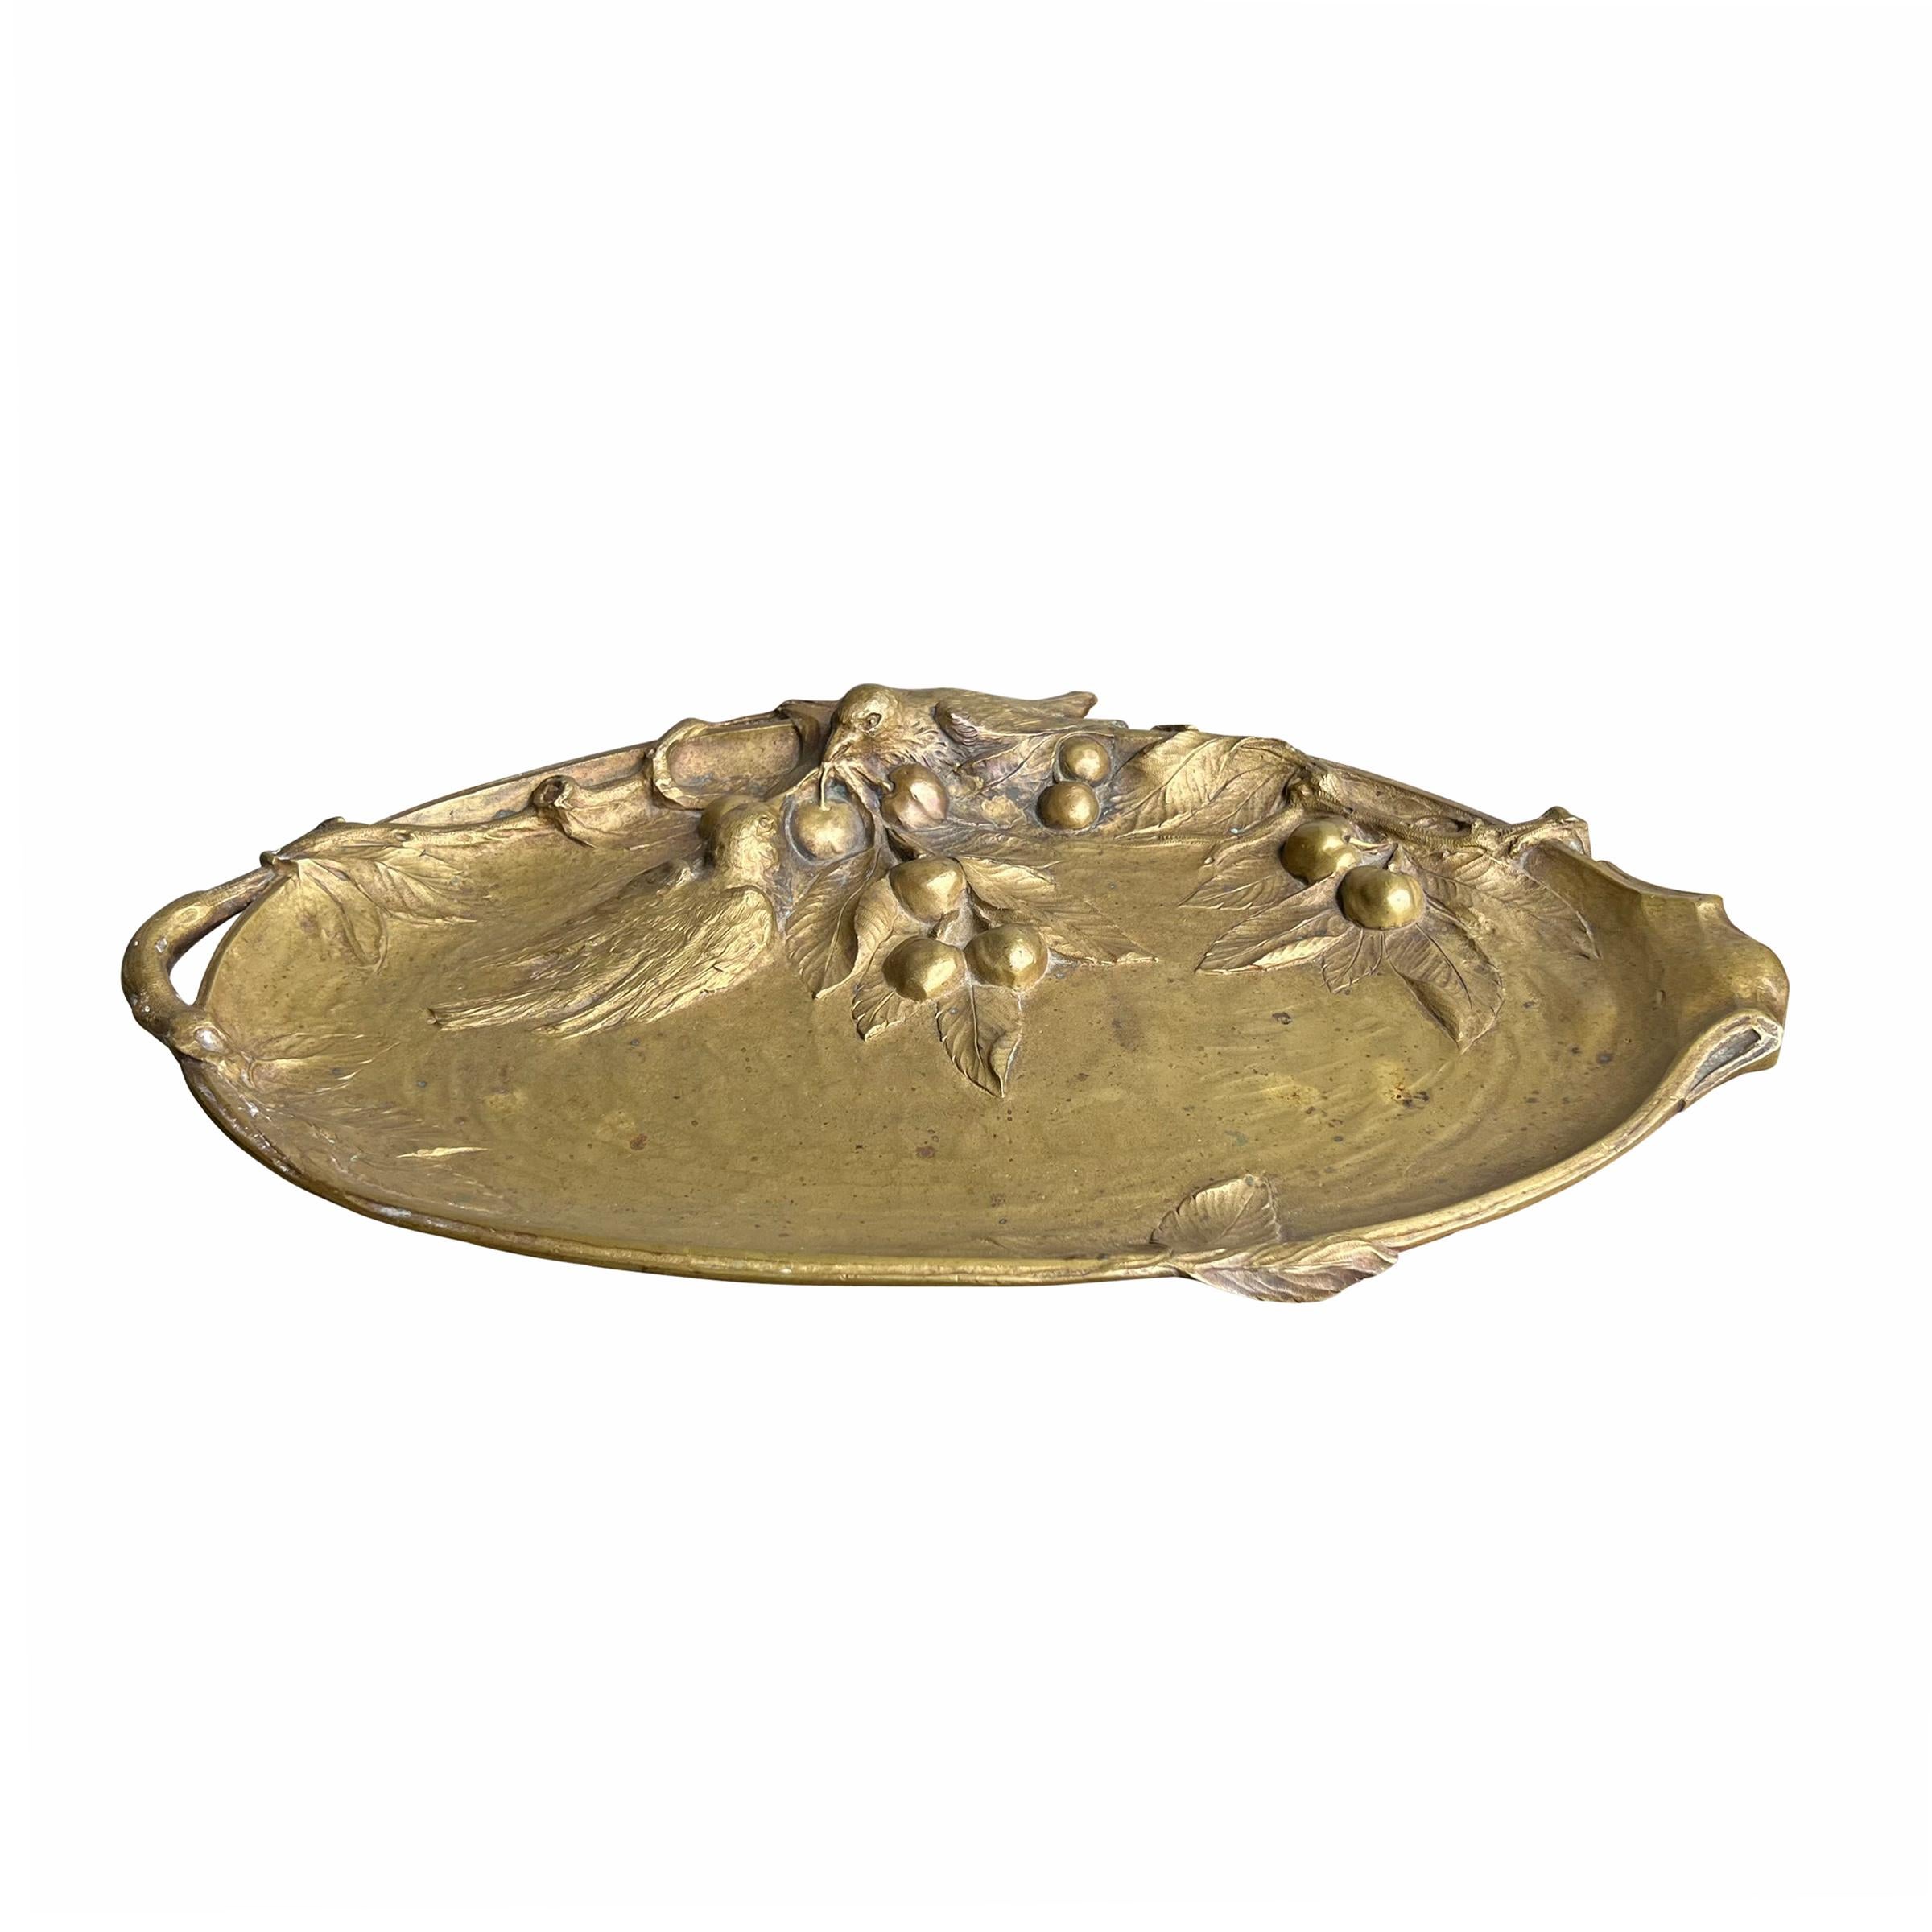 Gilt 19th Century French Art Nouveau Cast Bronze Tray with Birds and Cherries For Sale